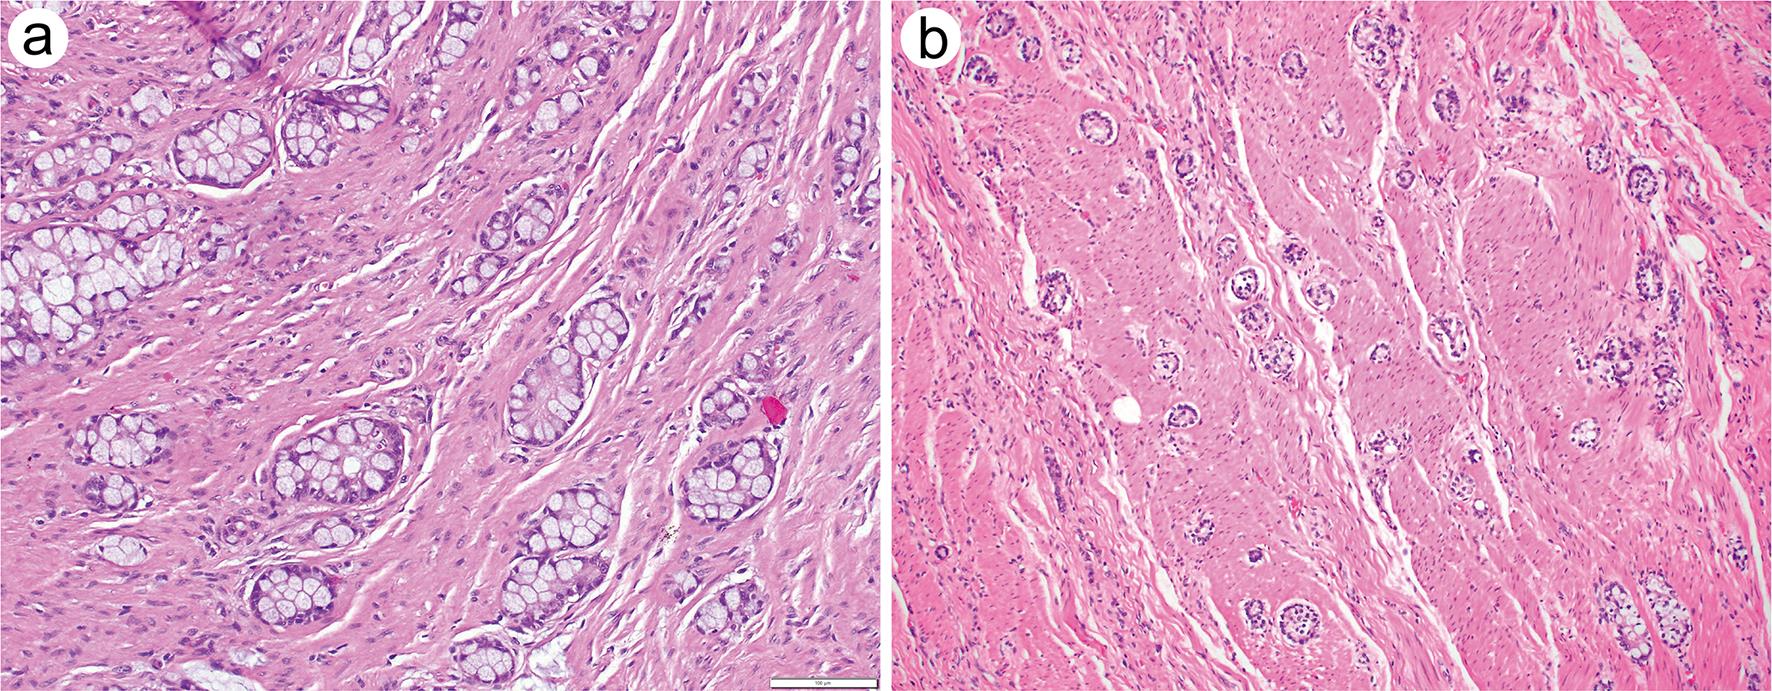 Overinterpretation is common in pathological diagnosis of appendix cancer  during patient referral for oncologic care | PLOS ONE